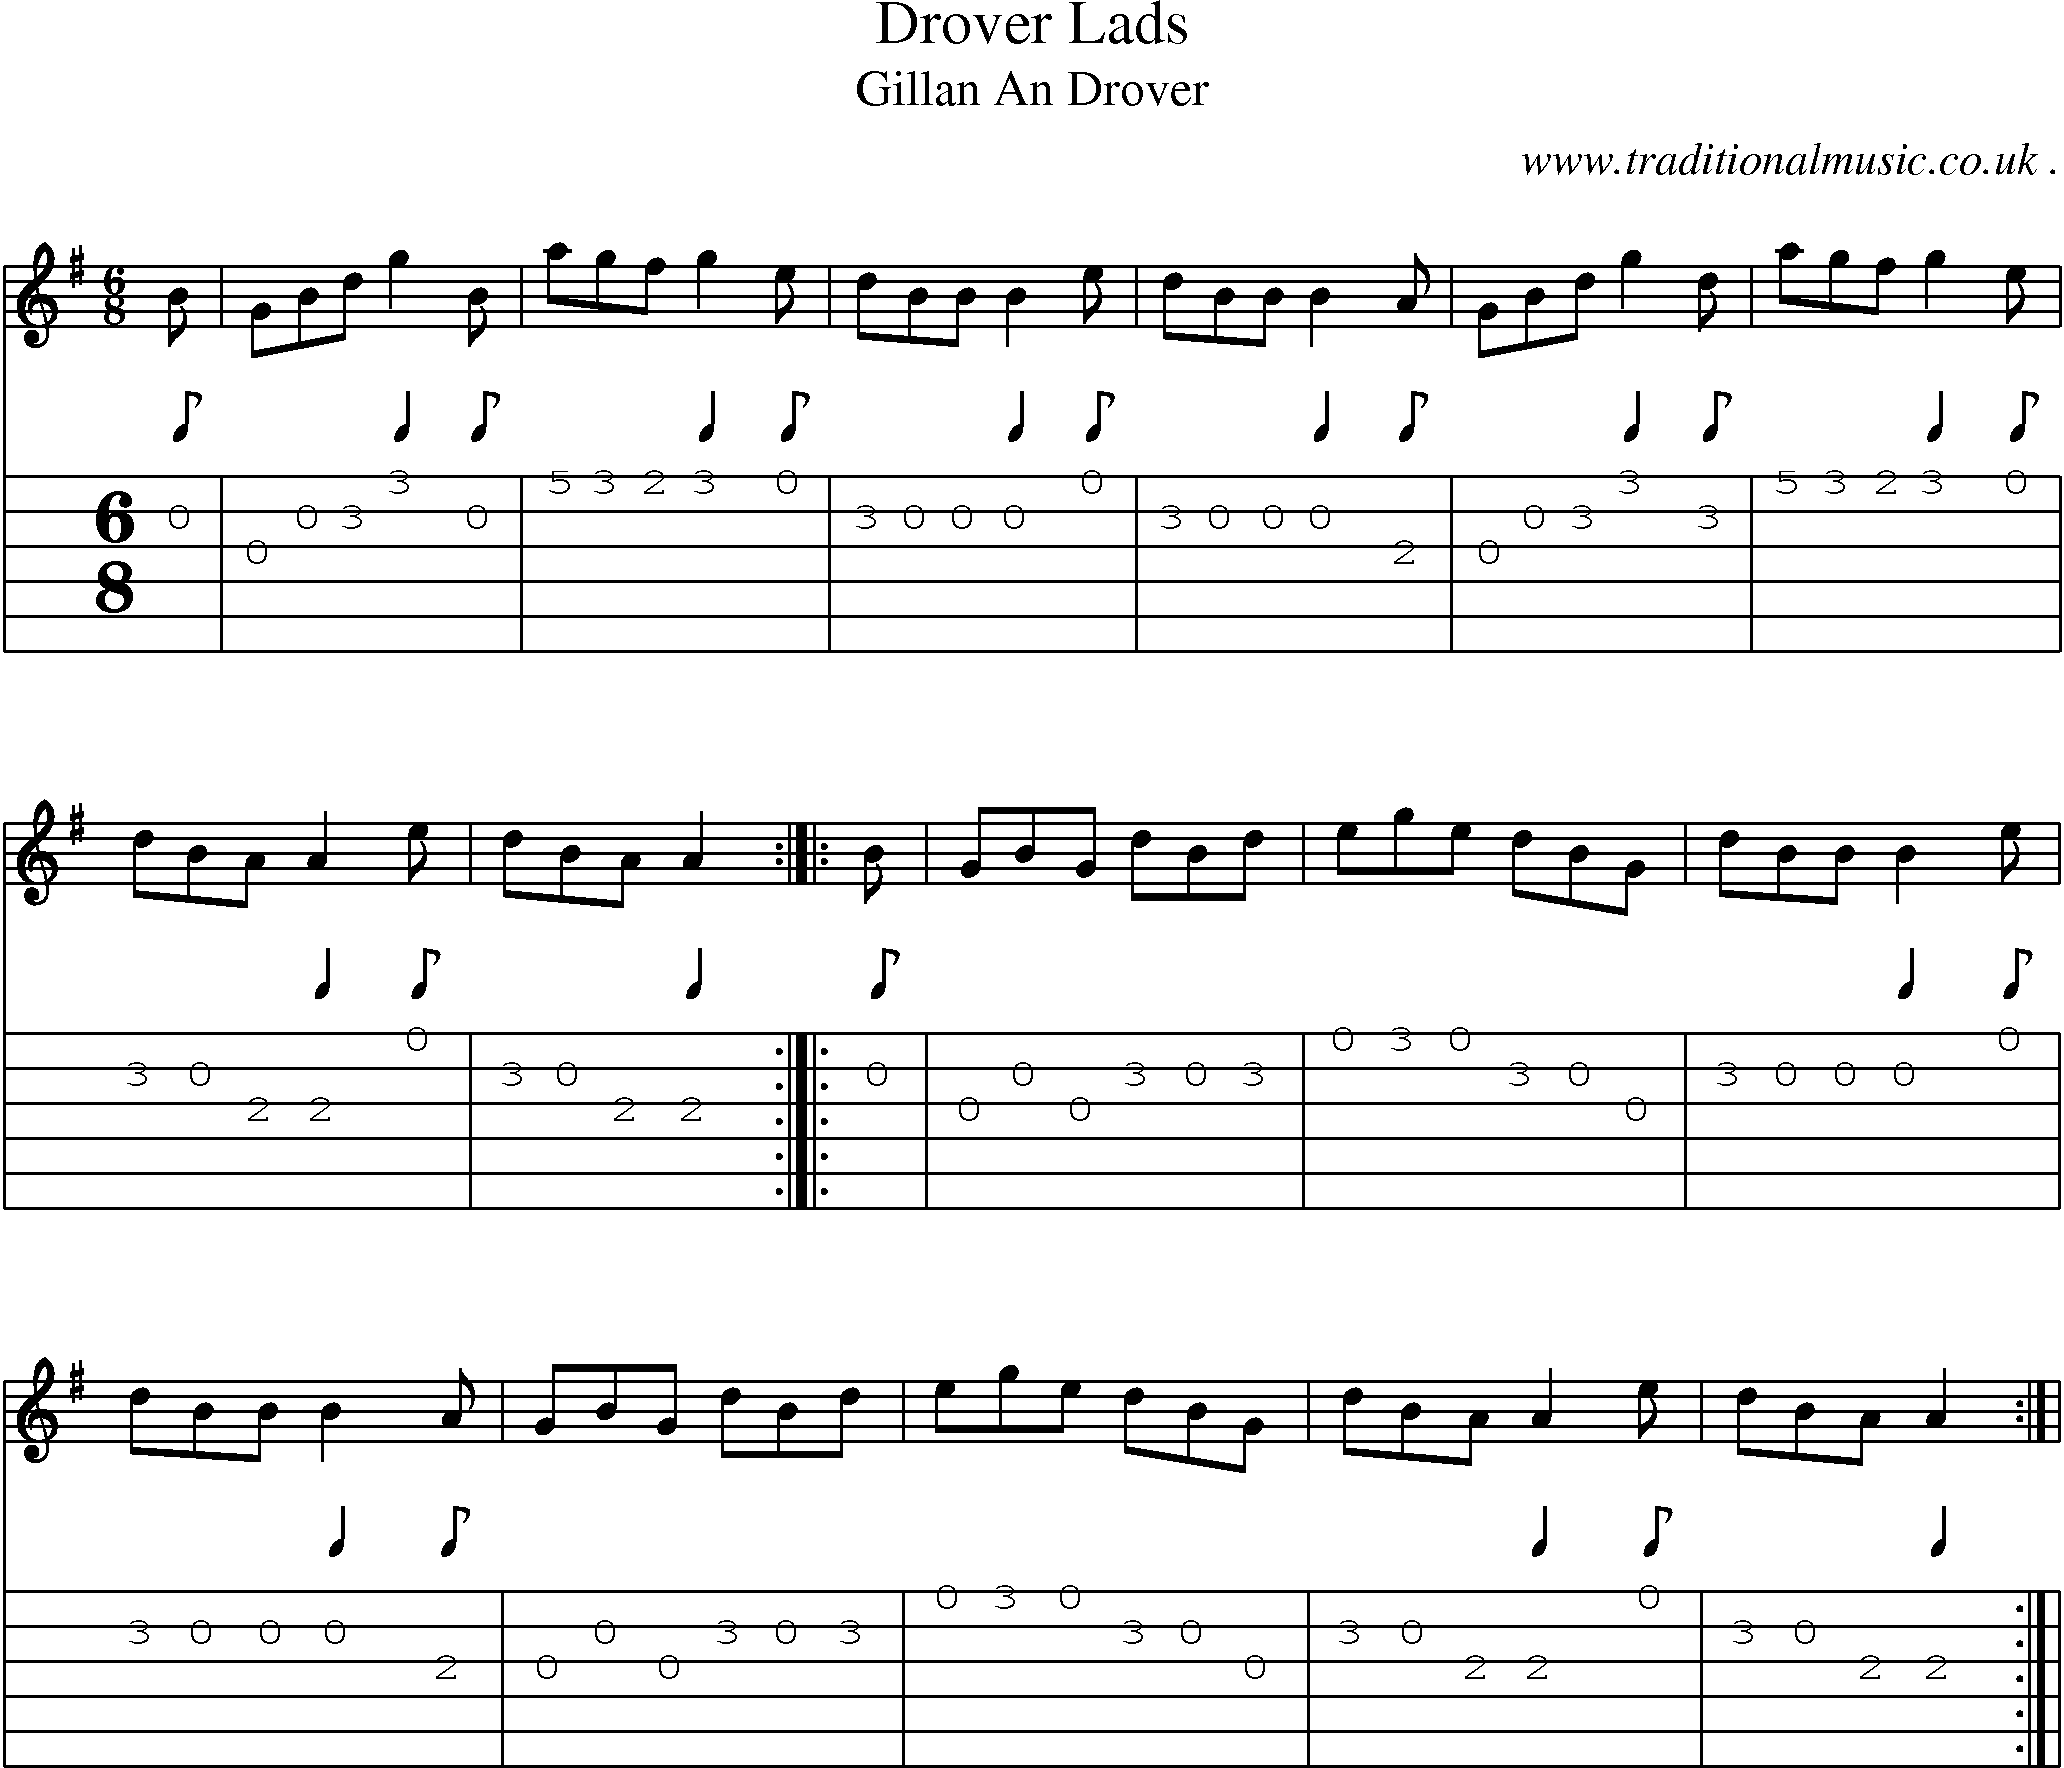 Sheet-Music and Guitar Tabs for Drover Lads